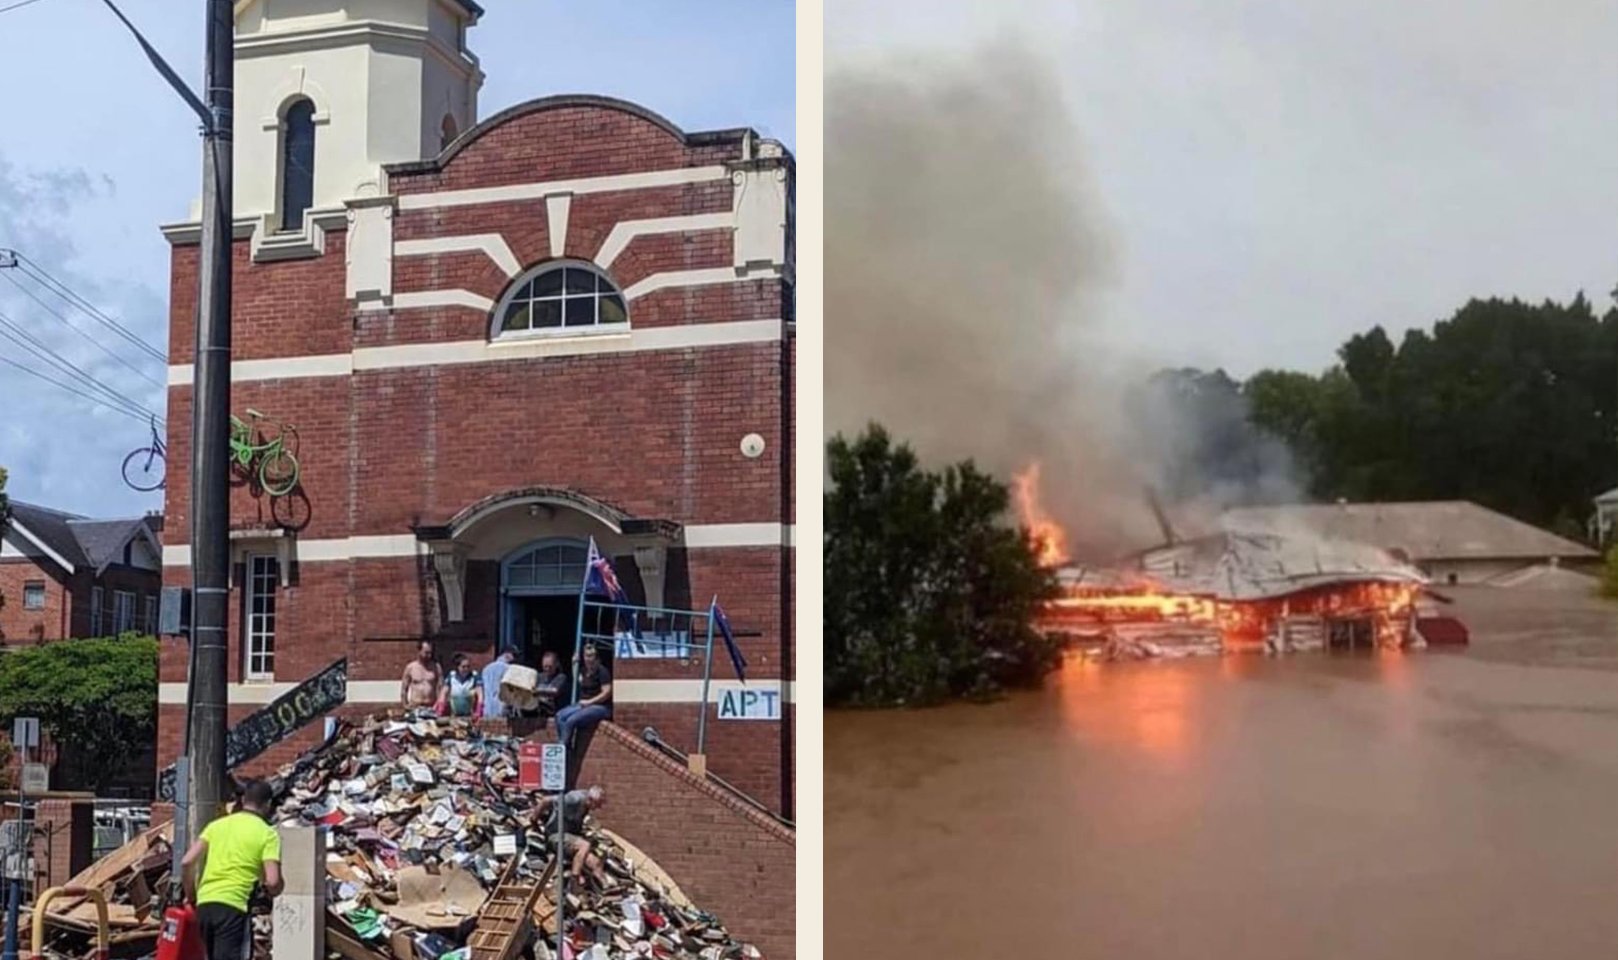 2 images of the floods in the Northern Rivers. The image on the left shows peoples belongings, ruined, and piled up at a hall with bikes seen in the powerlines. The image on the right shows a house on fire, in flood water.